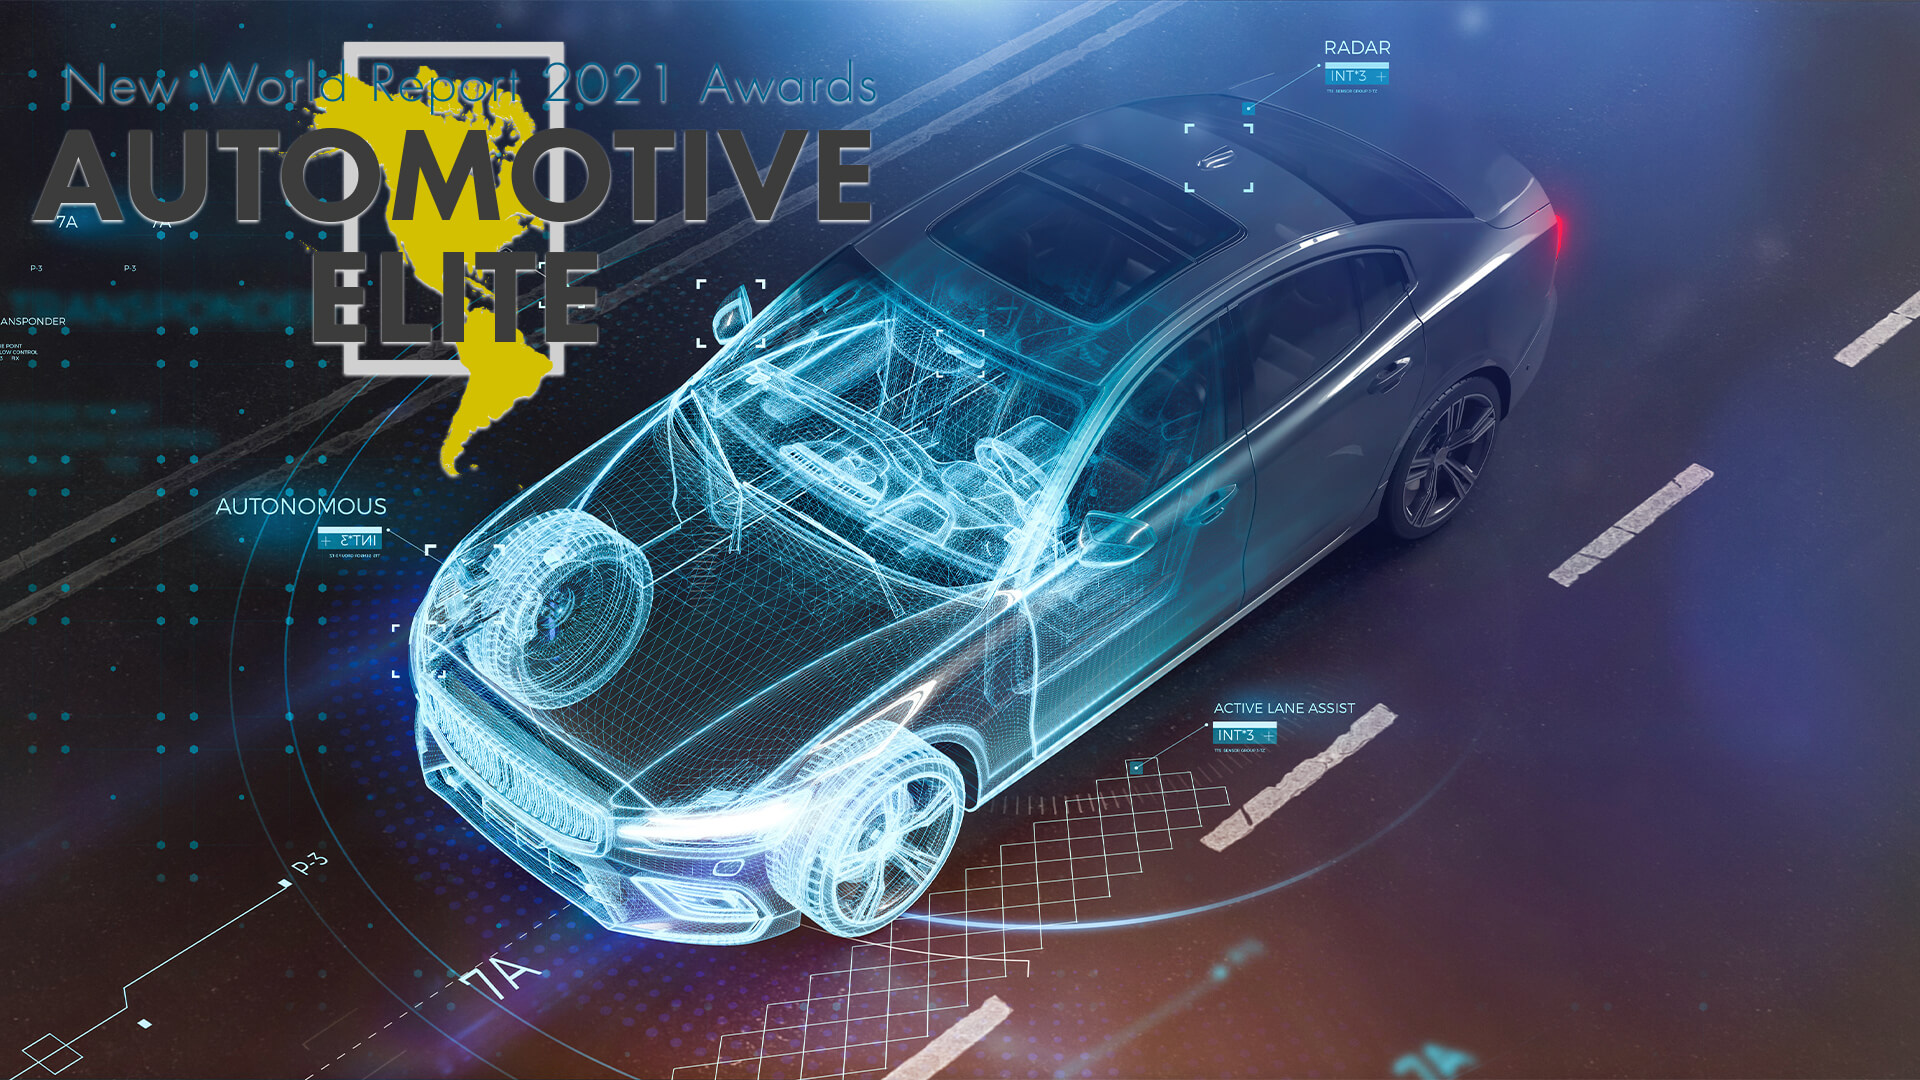 New World Report Automotive Awards 2021 logo with car blueprints in the background